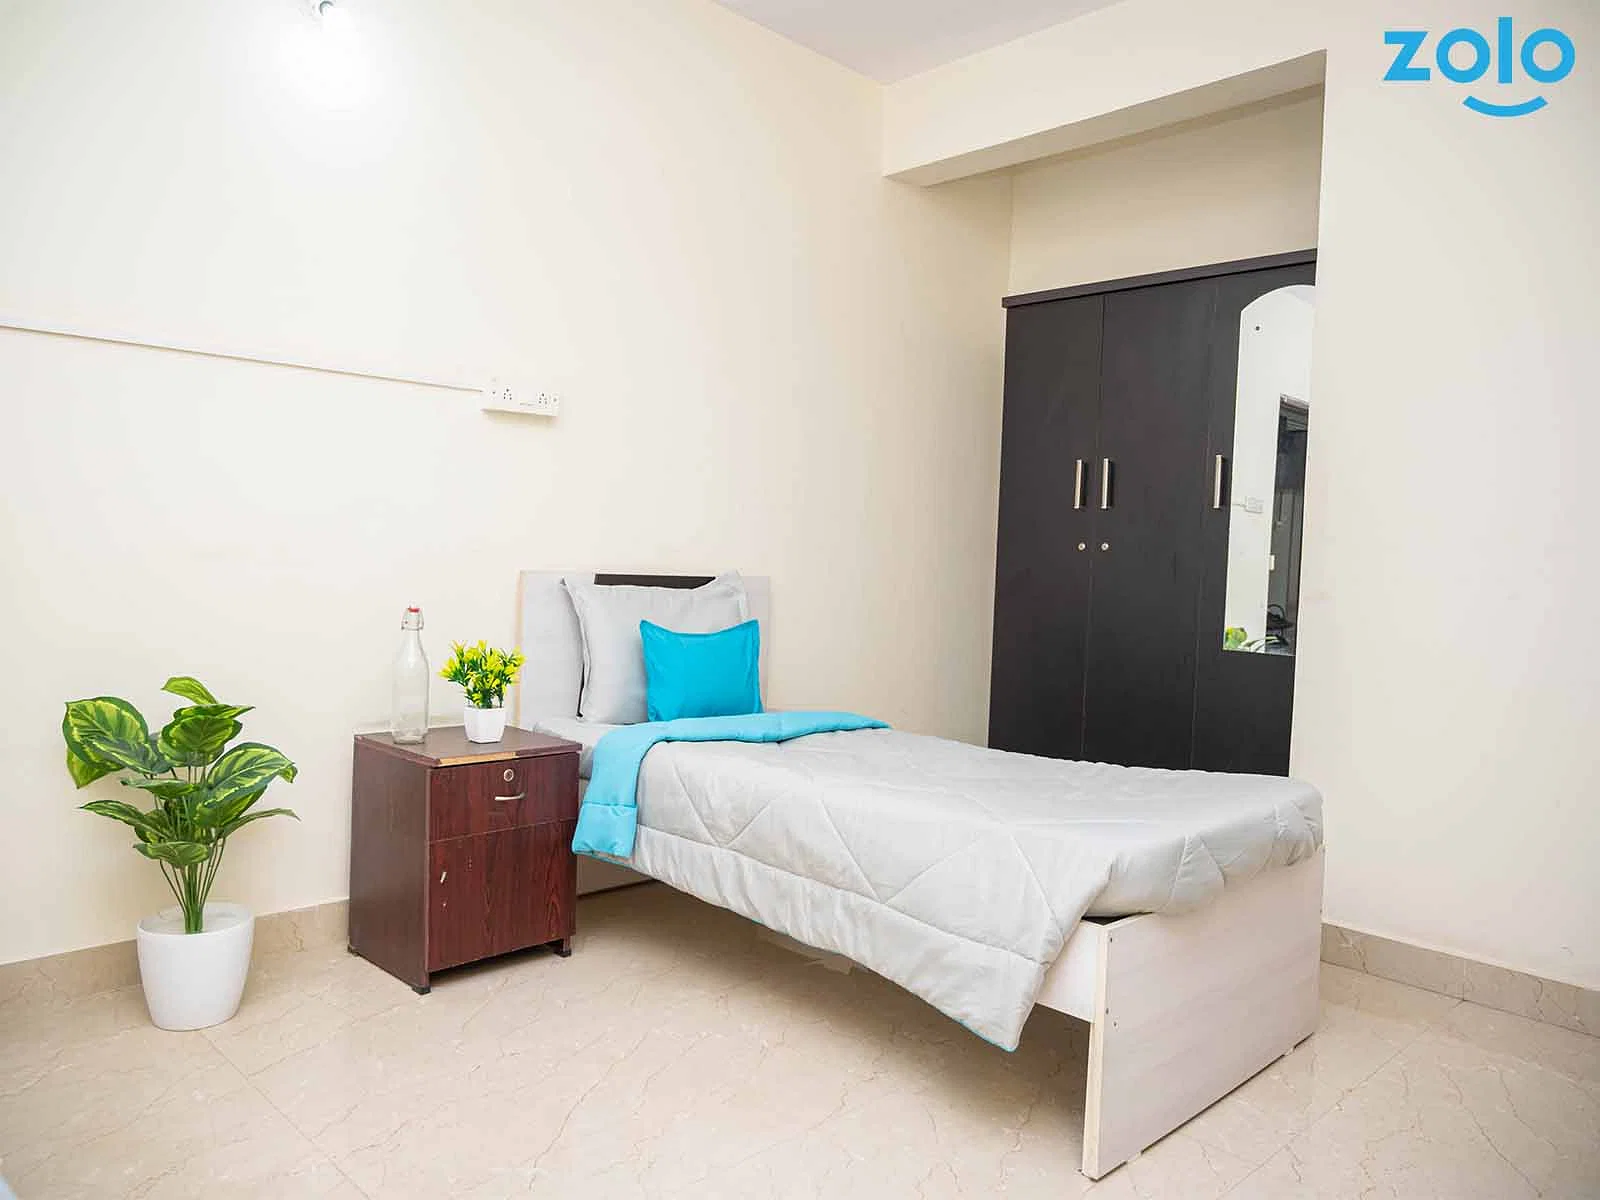 Affordable single rooms for students and working professionals in Thanisandra-Bangalore-Zolo Clapton